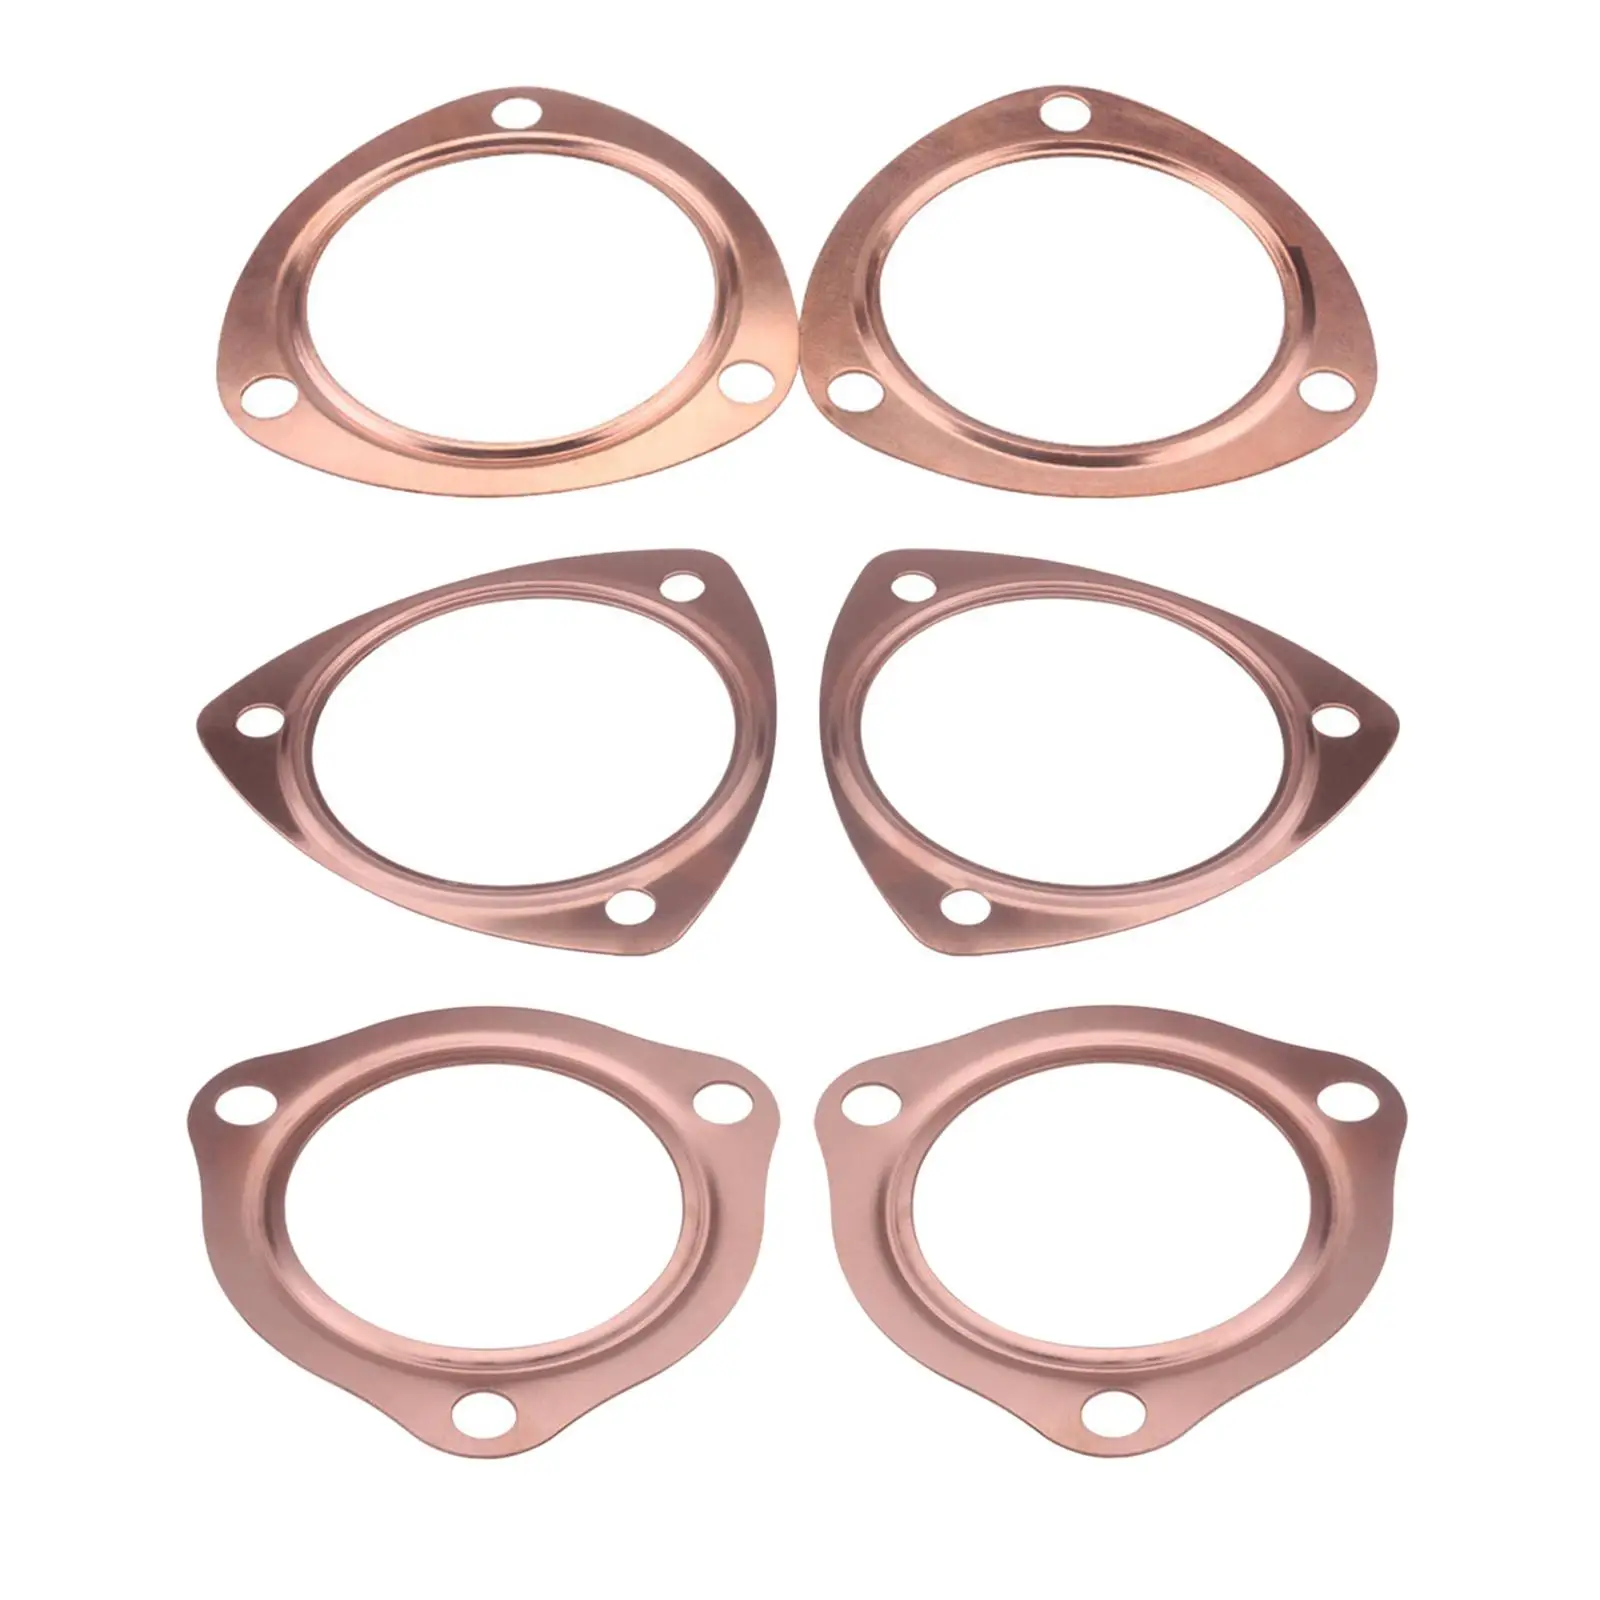 Copper Collector Gasket Copper Header Exhaust Collector Gaskets for Sbc Bbc 302 350 454 Replacement Automobile Accessory